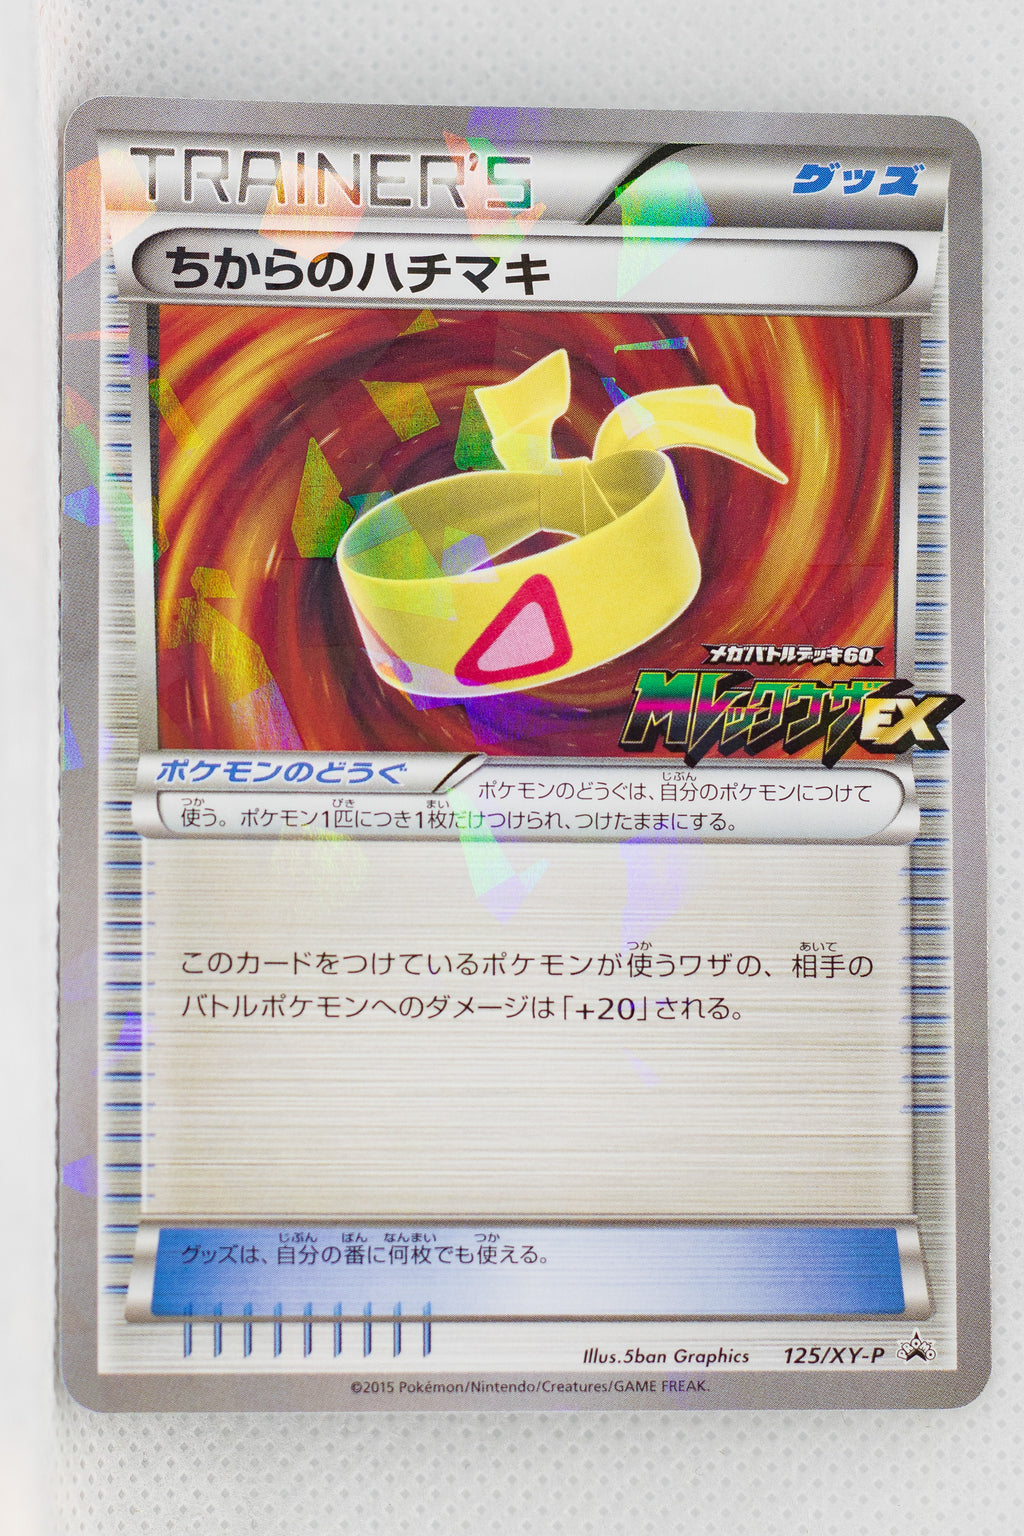 125/XY-P Muscle Band Pokémon Center M Rayquaza-EX Mega Battle Deck purchase (March 14, 2015) Holo